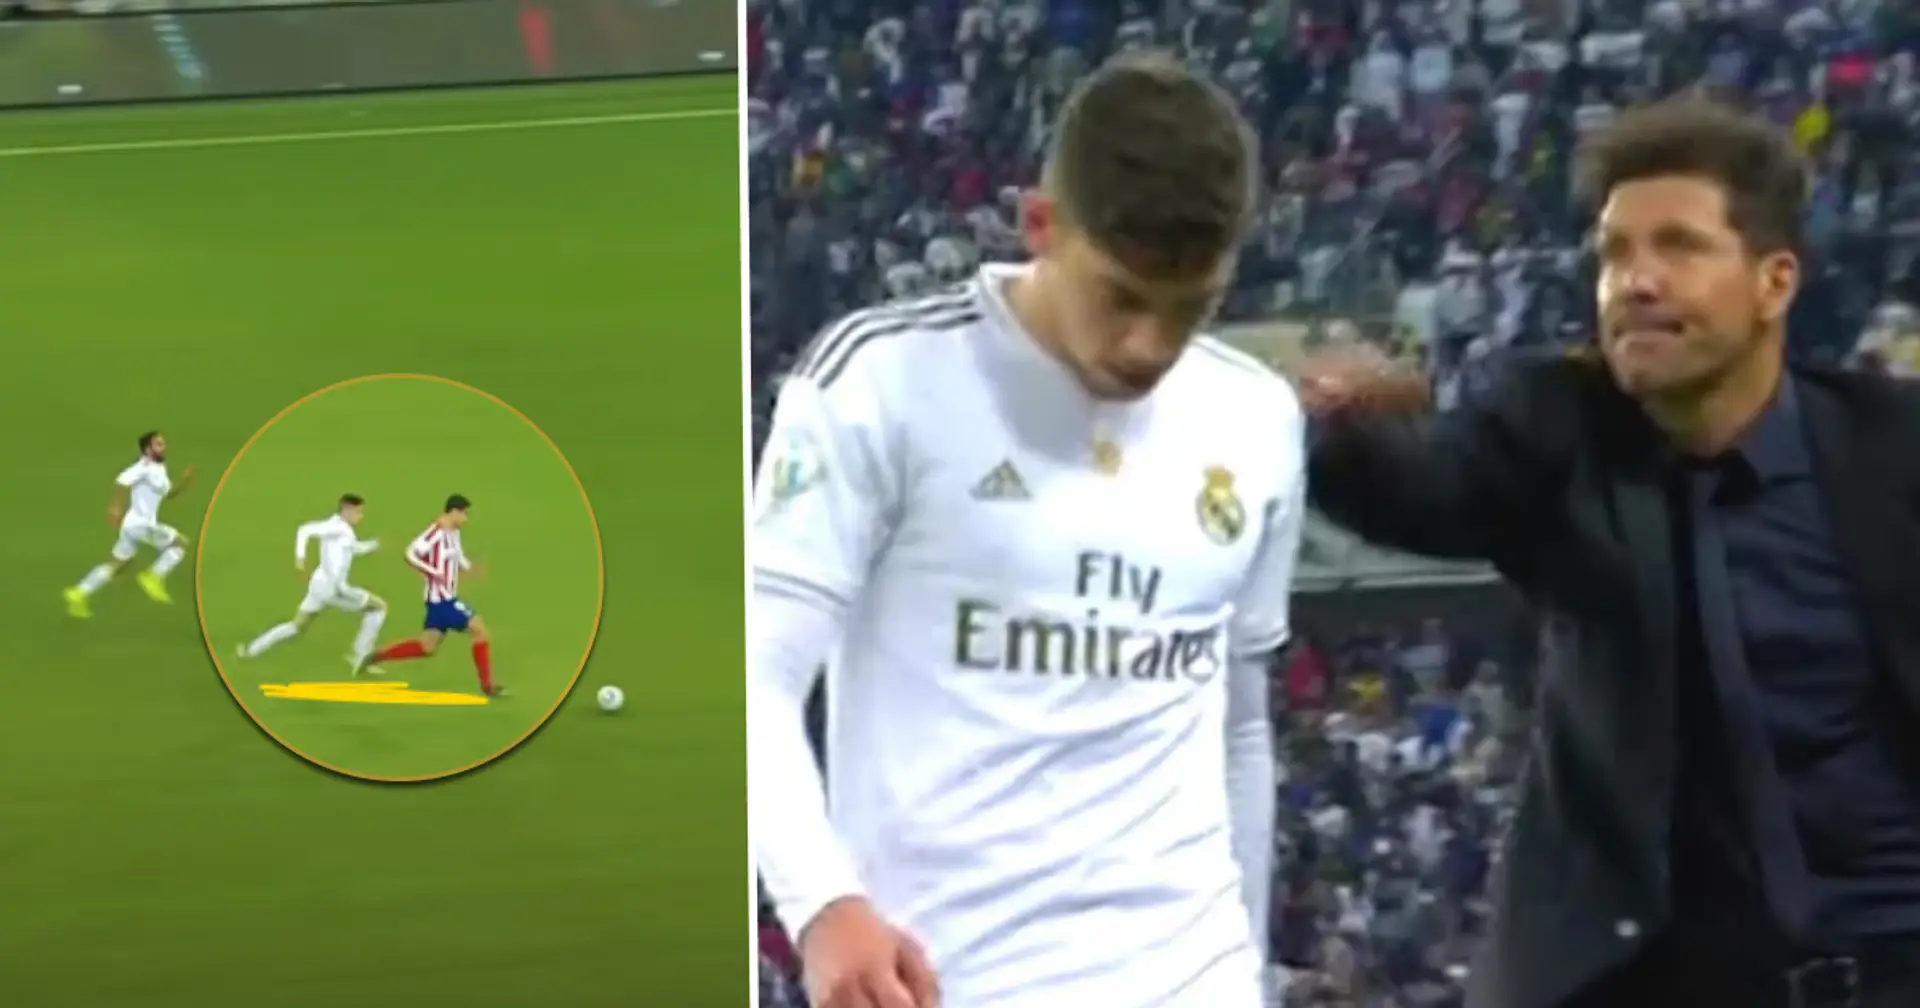 Fede Valverde's most iconic Real Madrid moment is a red card - he made Diego Simeone proud